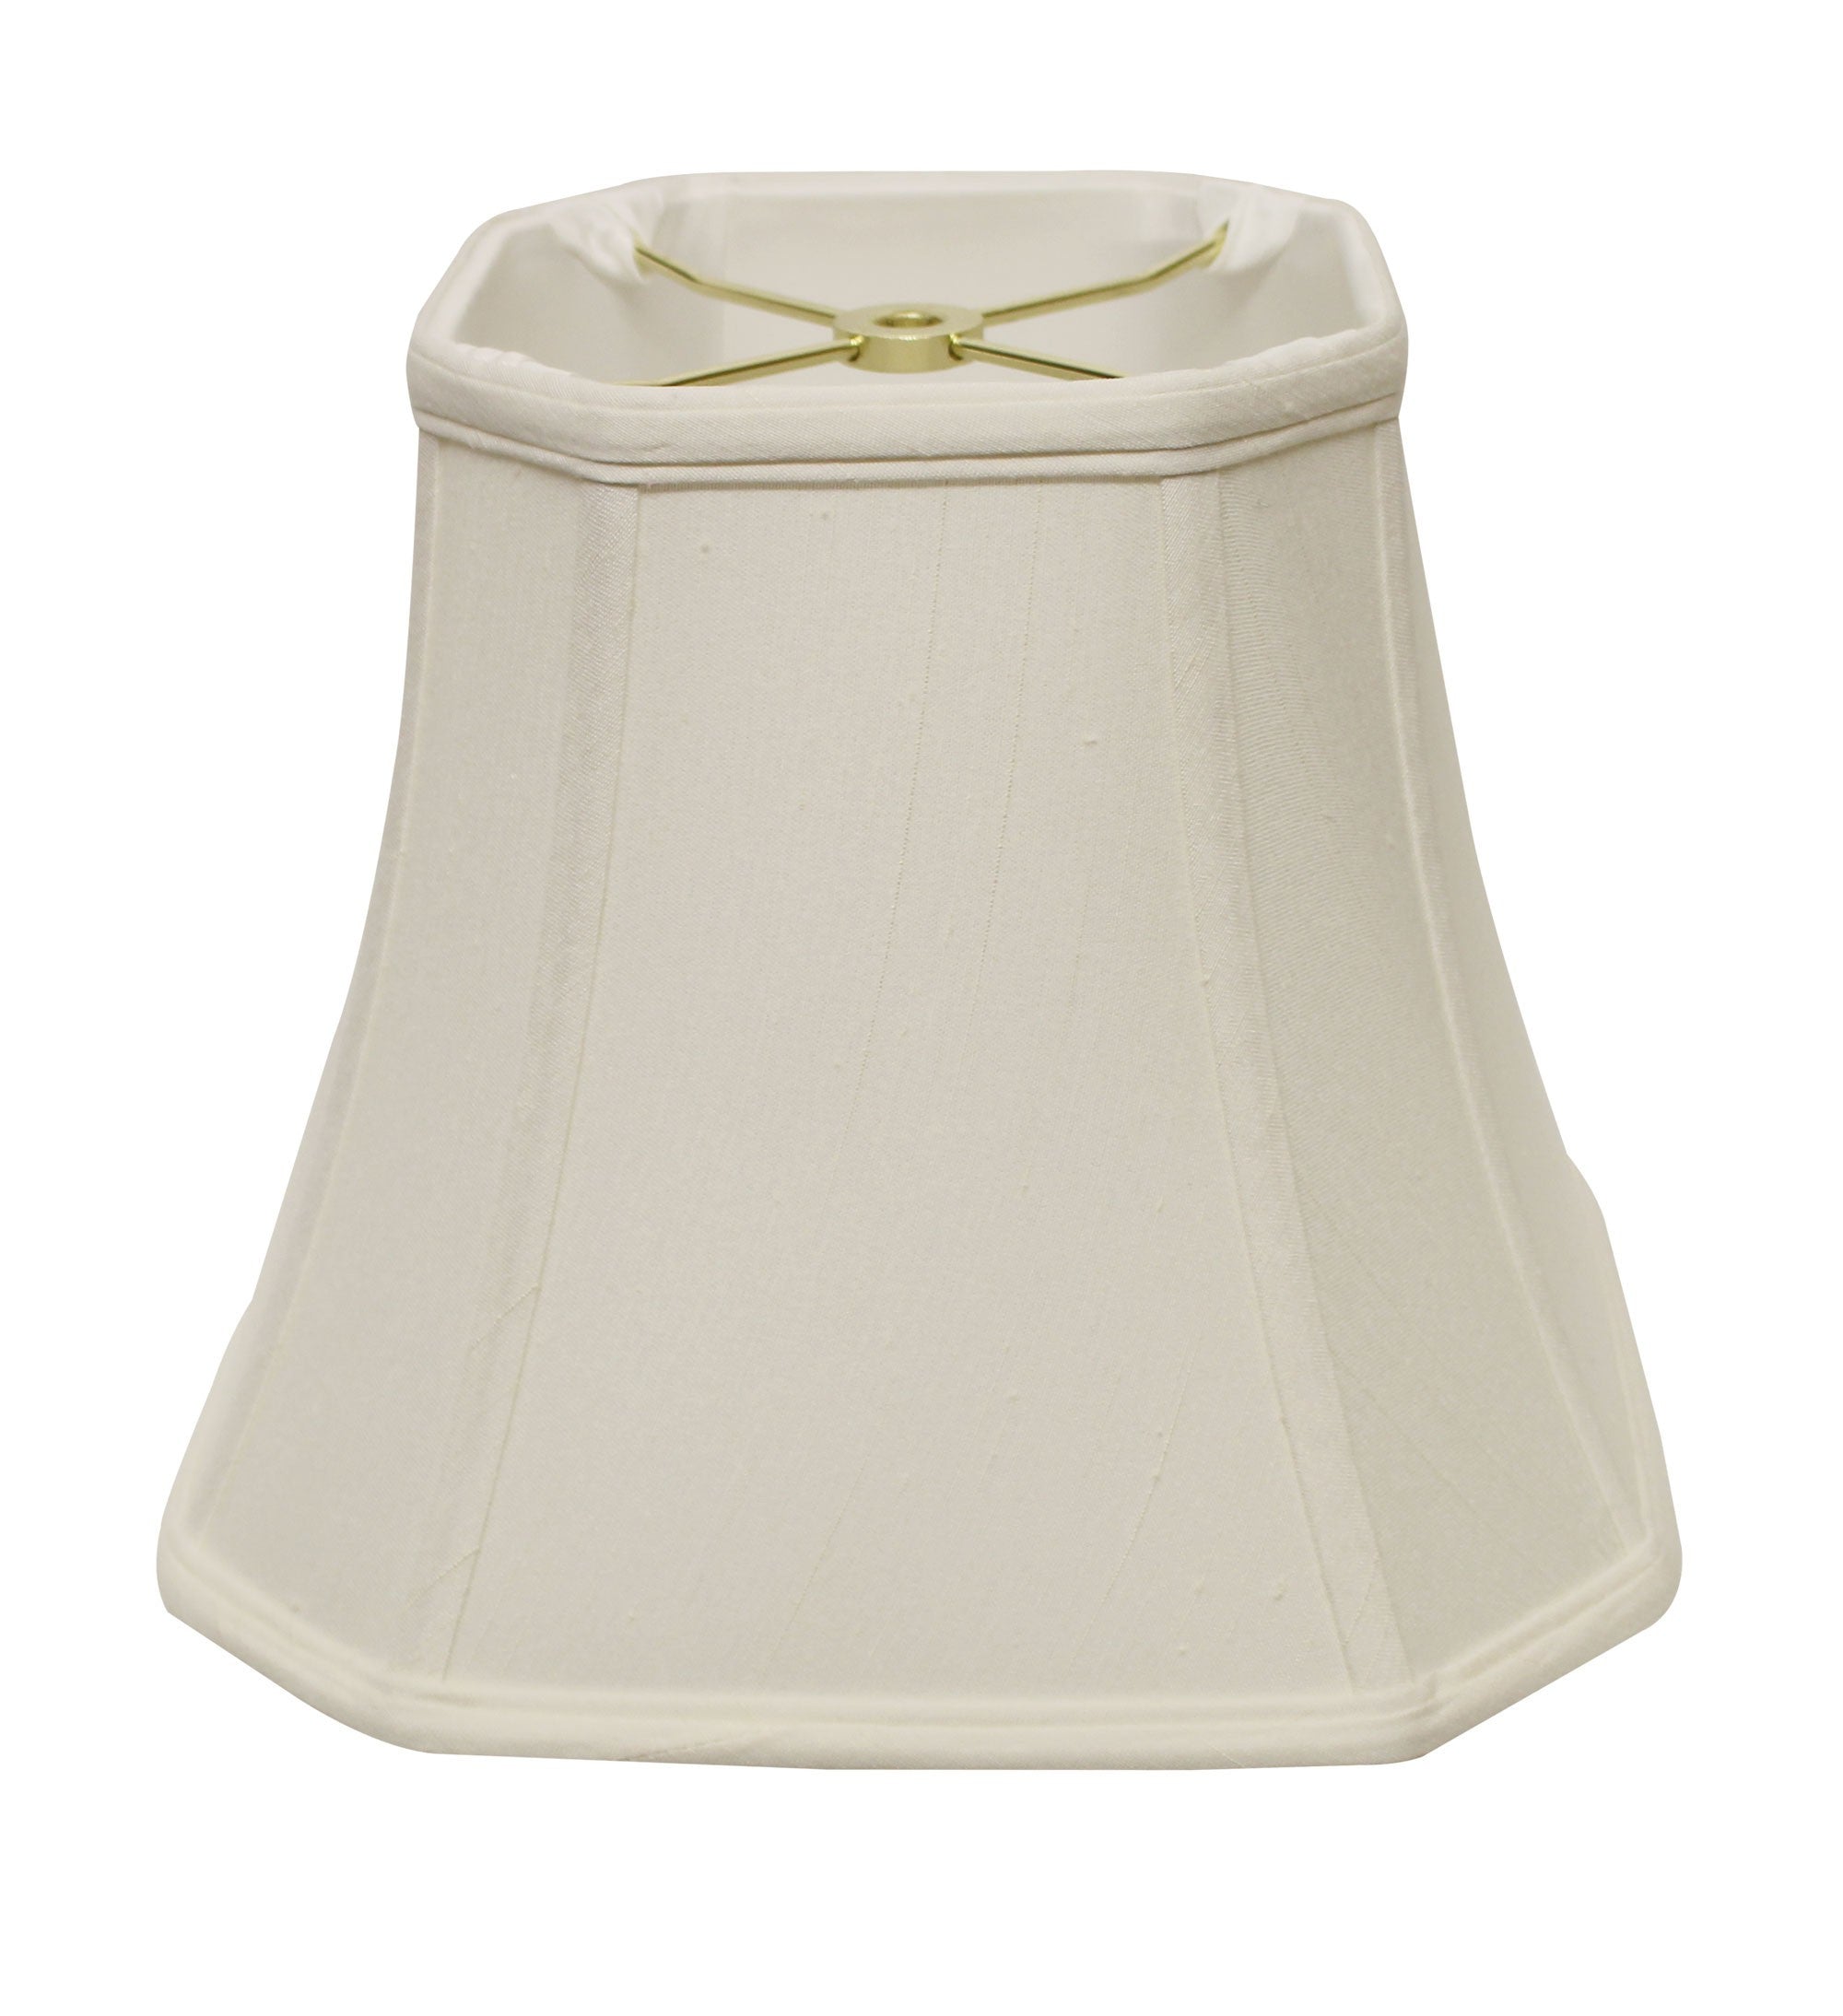 10" White Slanted Square Bell Monay Shantung Lampshade